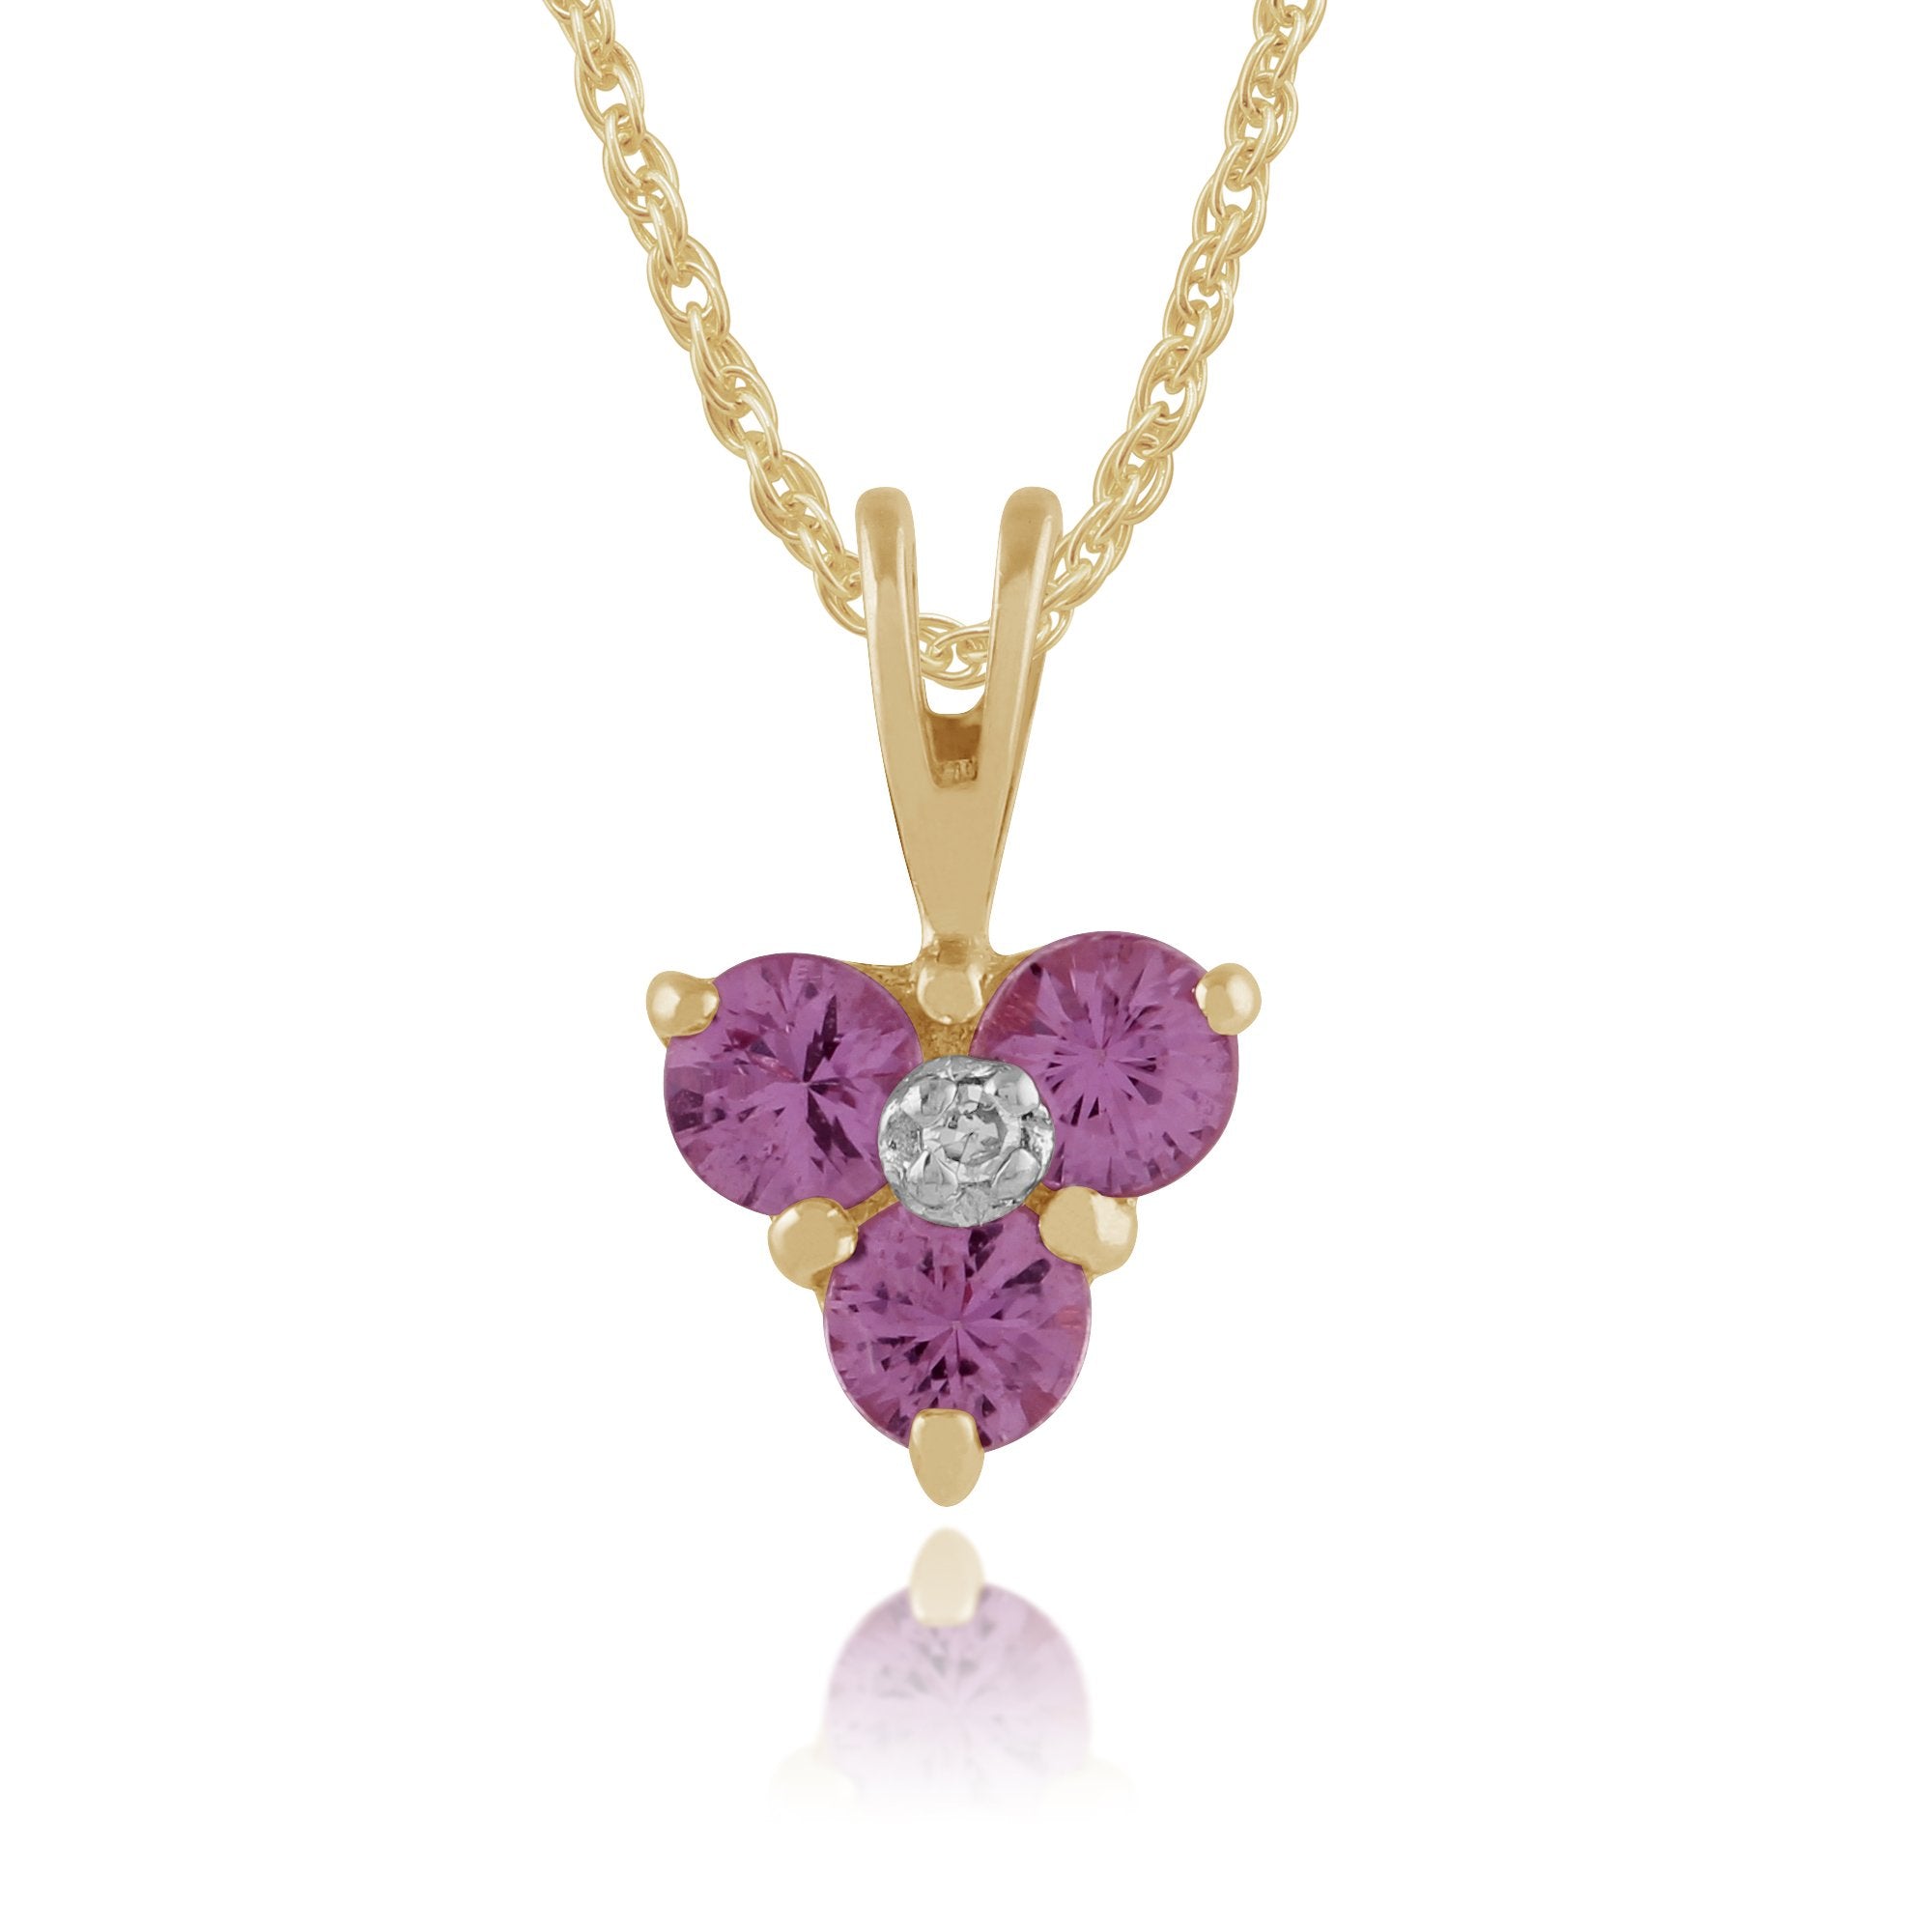 Classic Round Pink Sapphire & Diamond Cluster Pendant in 9ct Yellow Gold